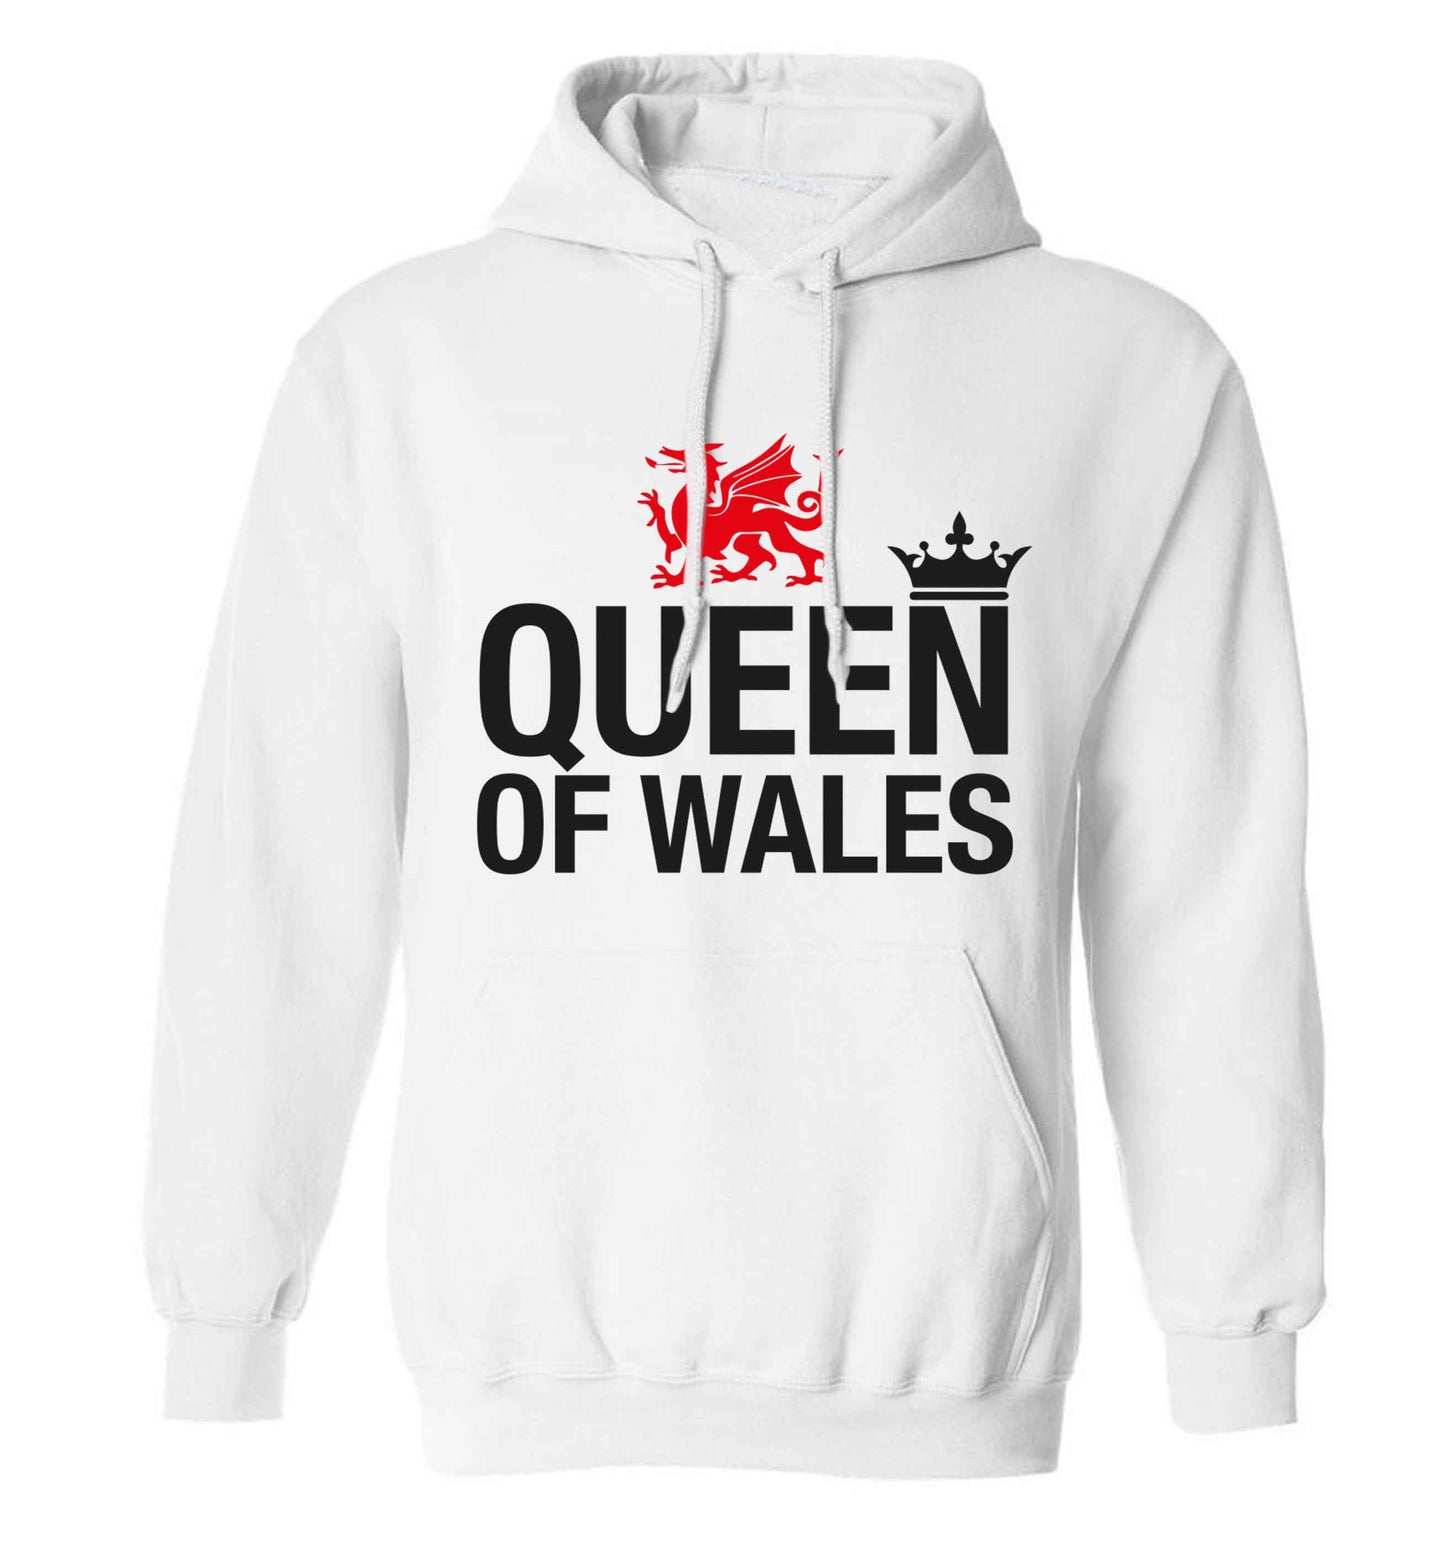 Queen of Wales adults unisex white hoodie 2XL